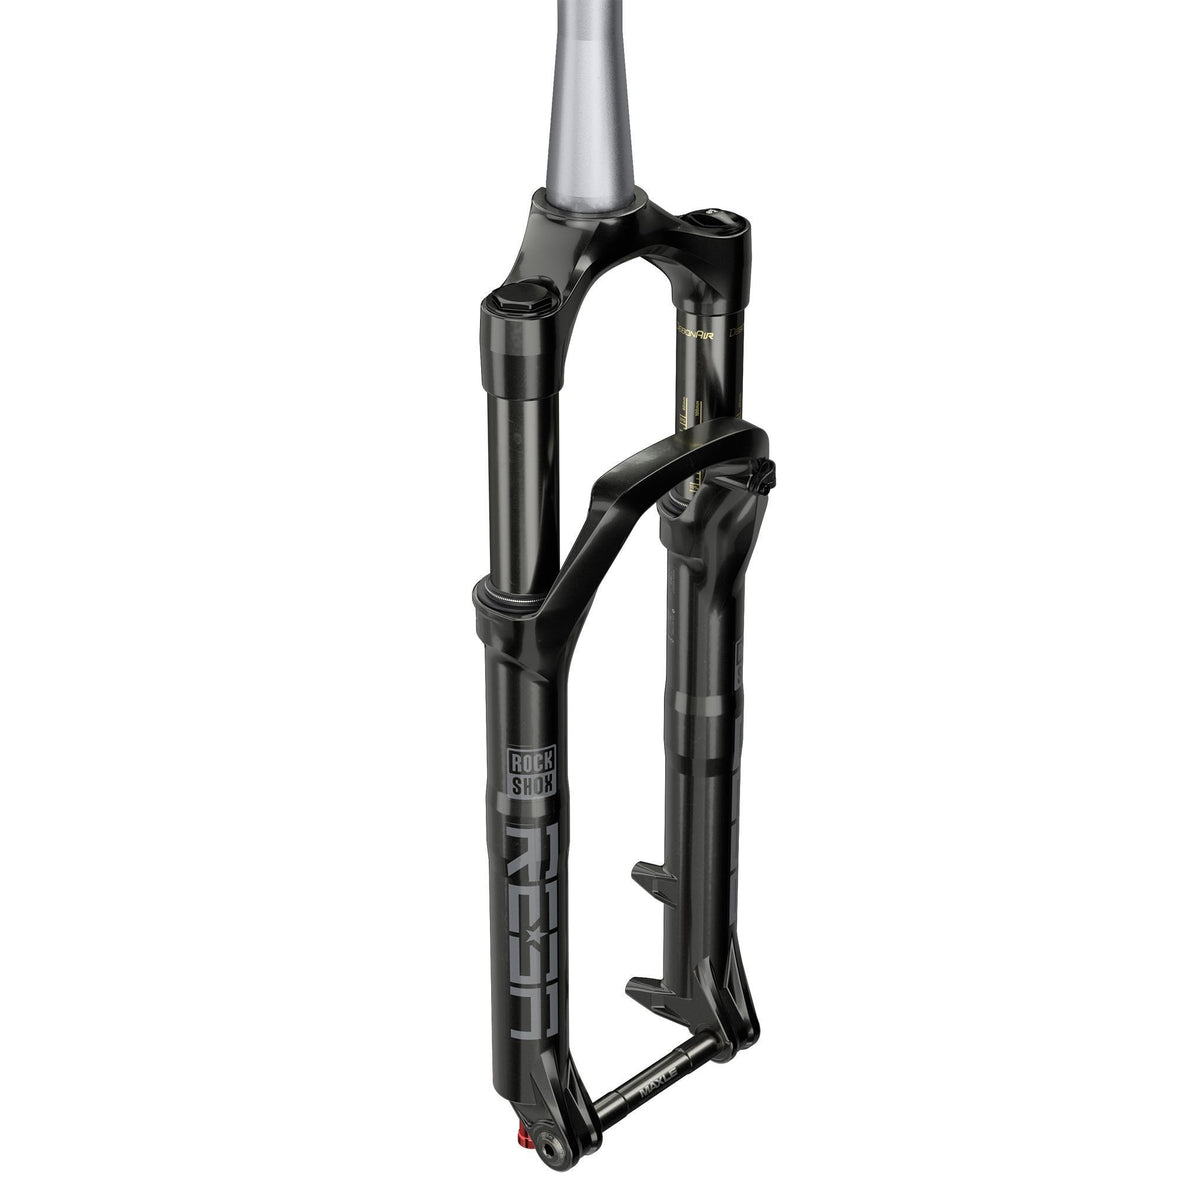 Rockshox Fork Reba Rl - Crown 26" 15X100 Alum Steerer Tapered 40 Offset Solo Air (Includes Star Nut & Maxle Stealth) A2